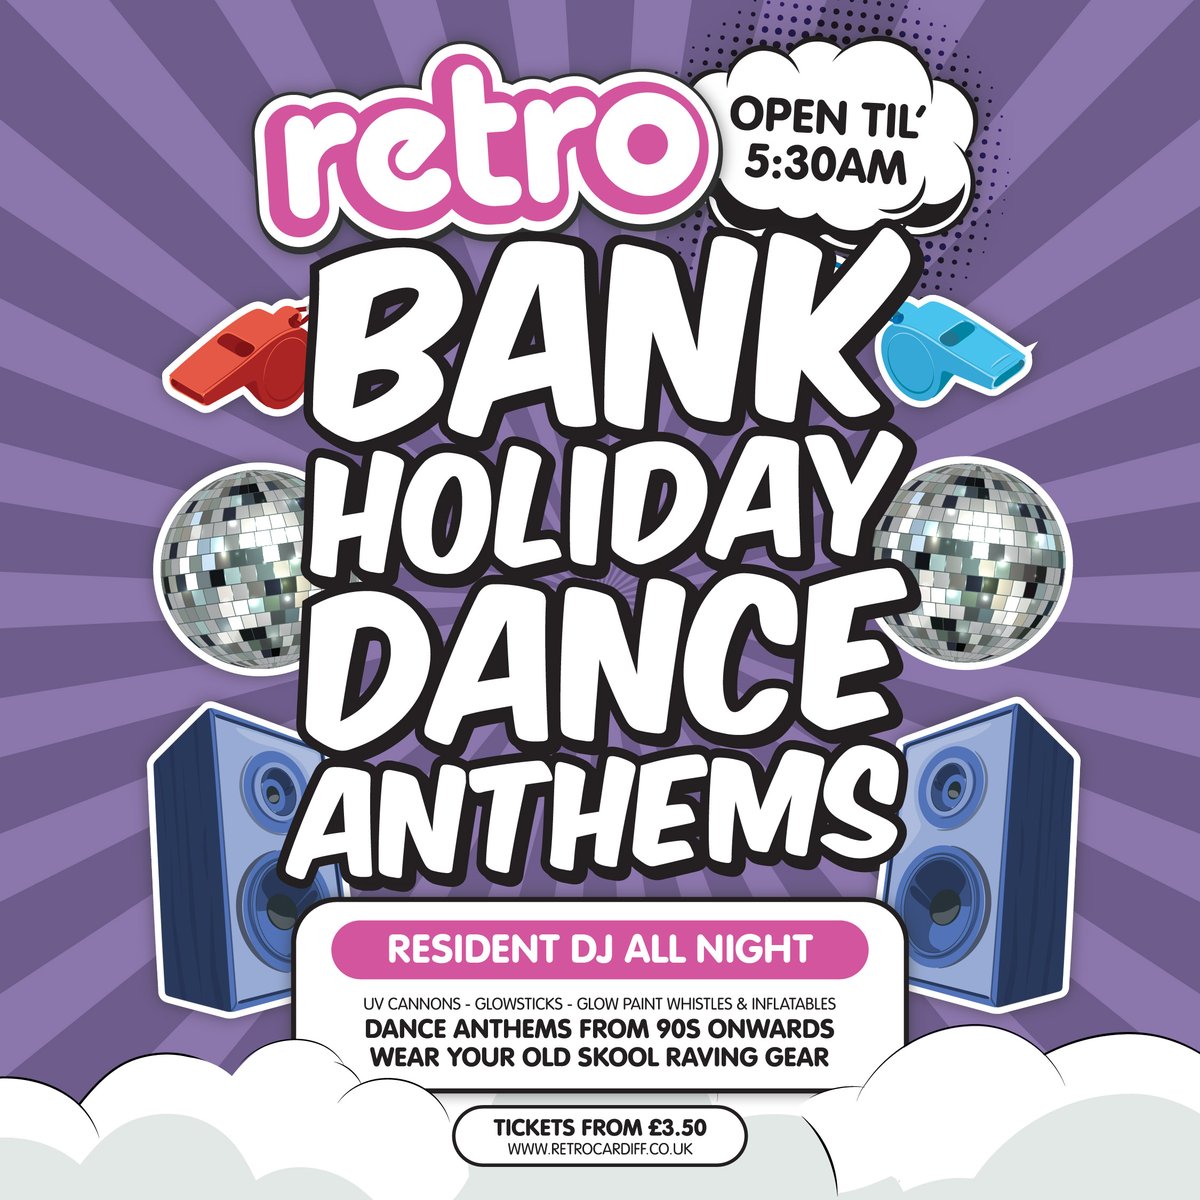 Cardiff is going to be 'chockers' this bank holiday weekend with Bruce Springsteen in town 🎶 Head to Retro on Sunday for a doubleheader of Springsteen Karaoke before 10.30PM and Bank Holiday Dance Anthems onwards until 5.30am! Get your tickets now: fixr.co/event/bank-hol…